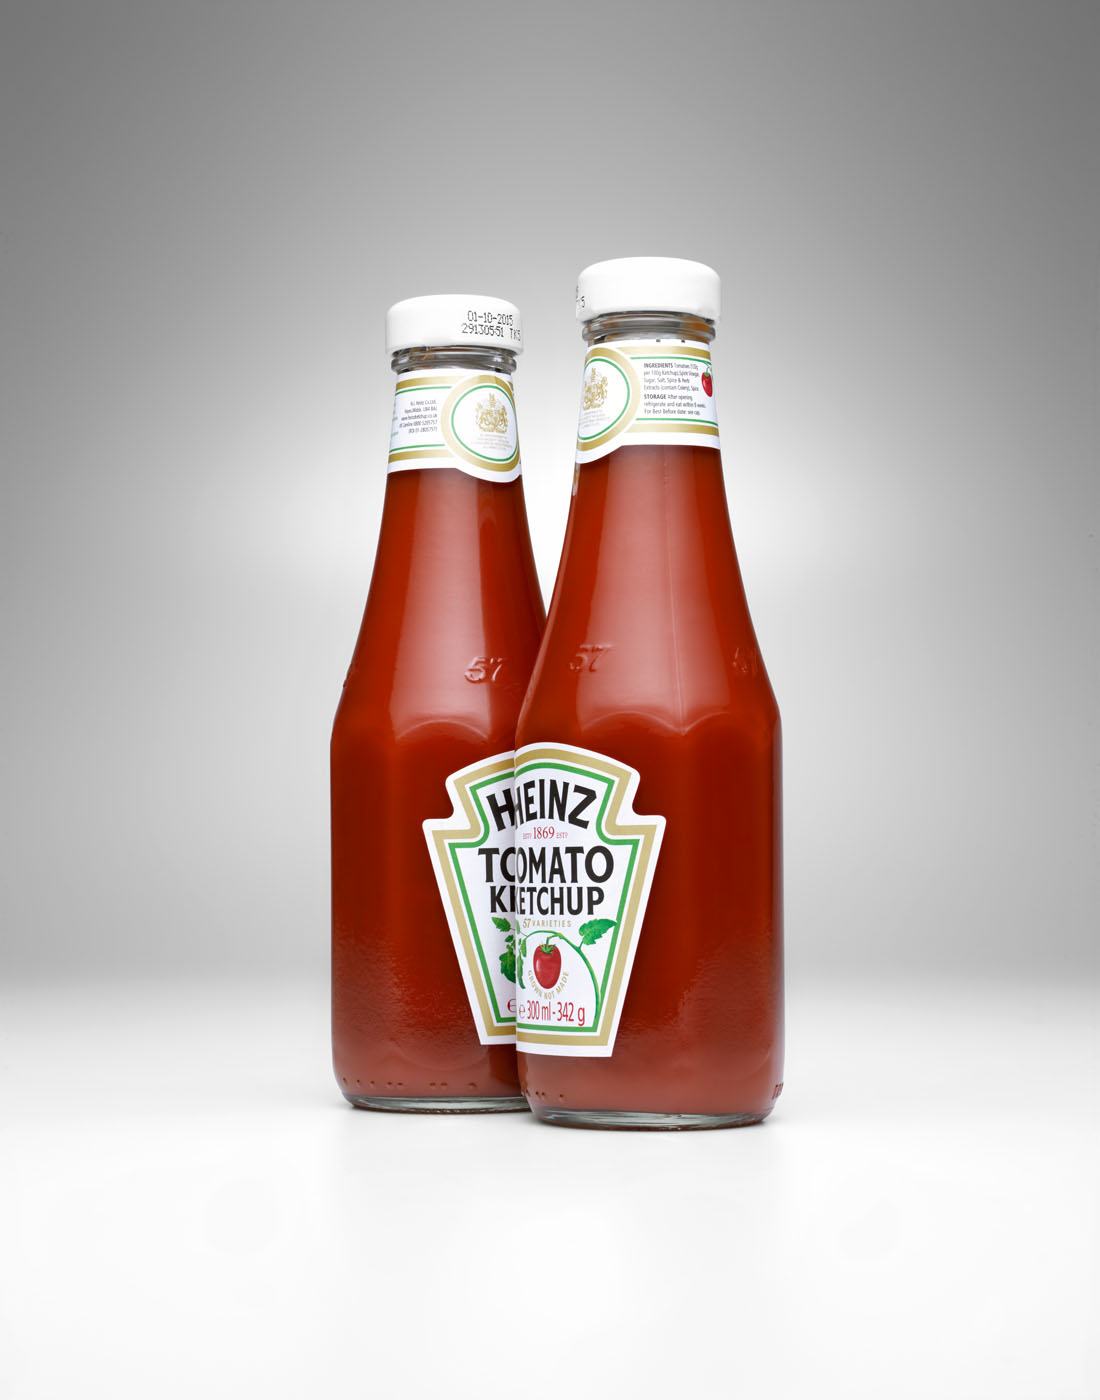 Heinz tomato ketchup by Alexander Kent London based still life and product photographer.